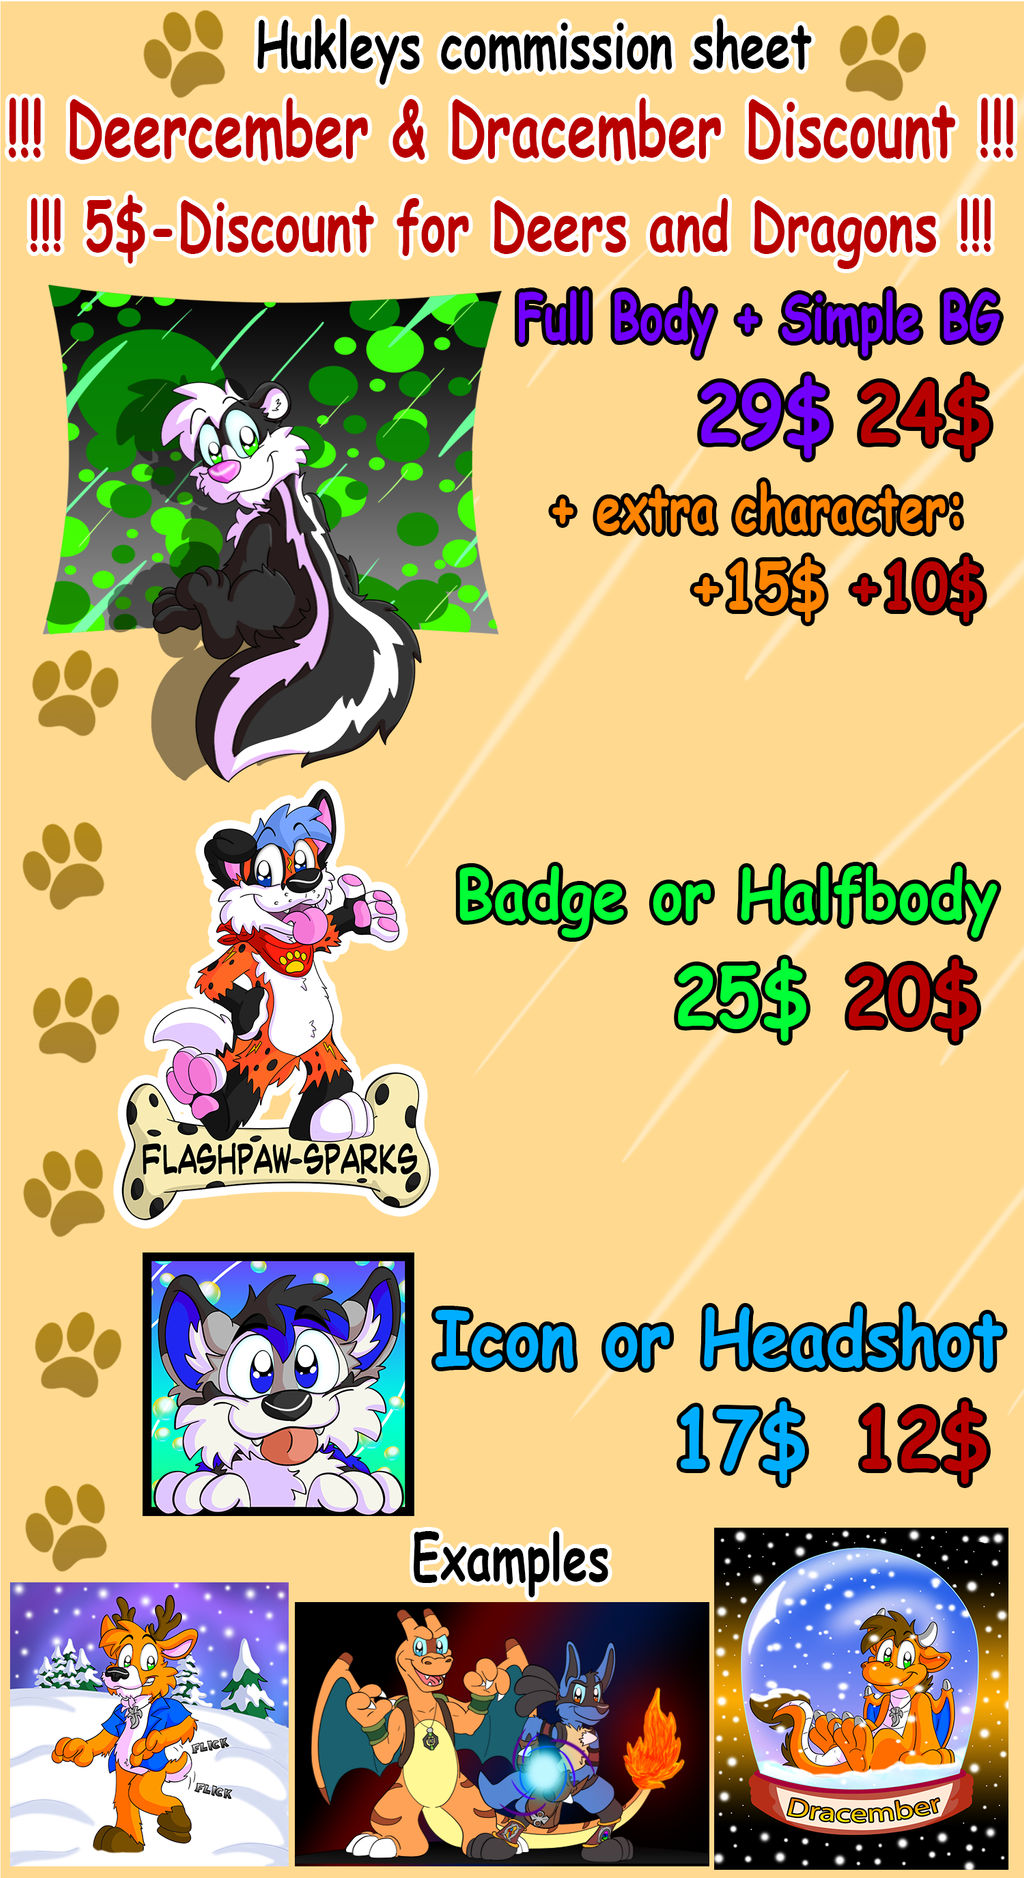 Commissions with Deercember and Dracember Discount